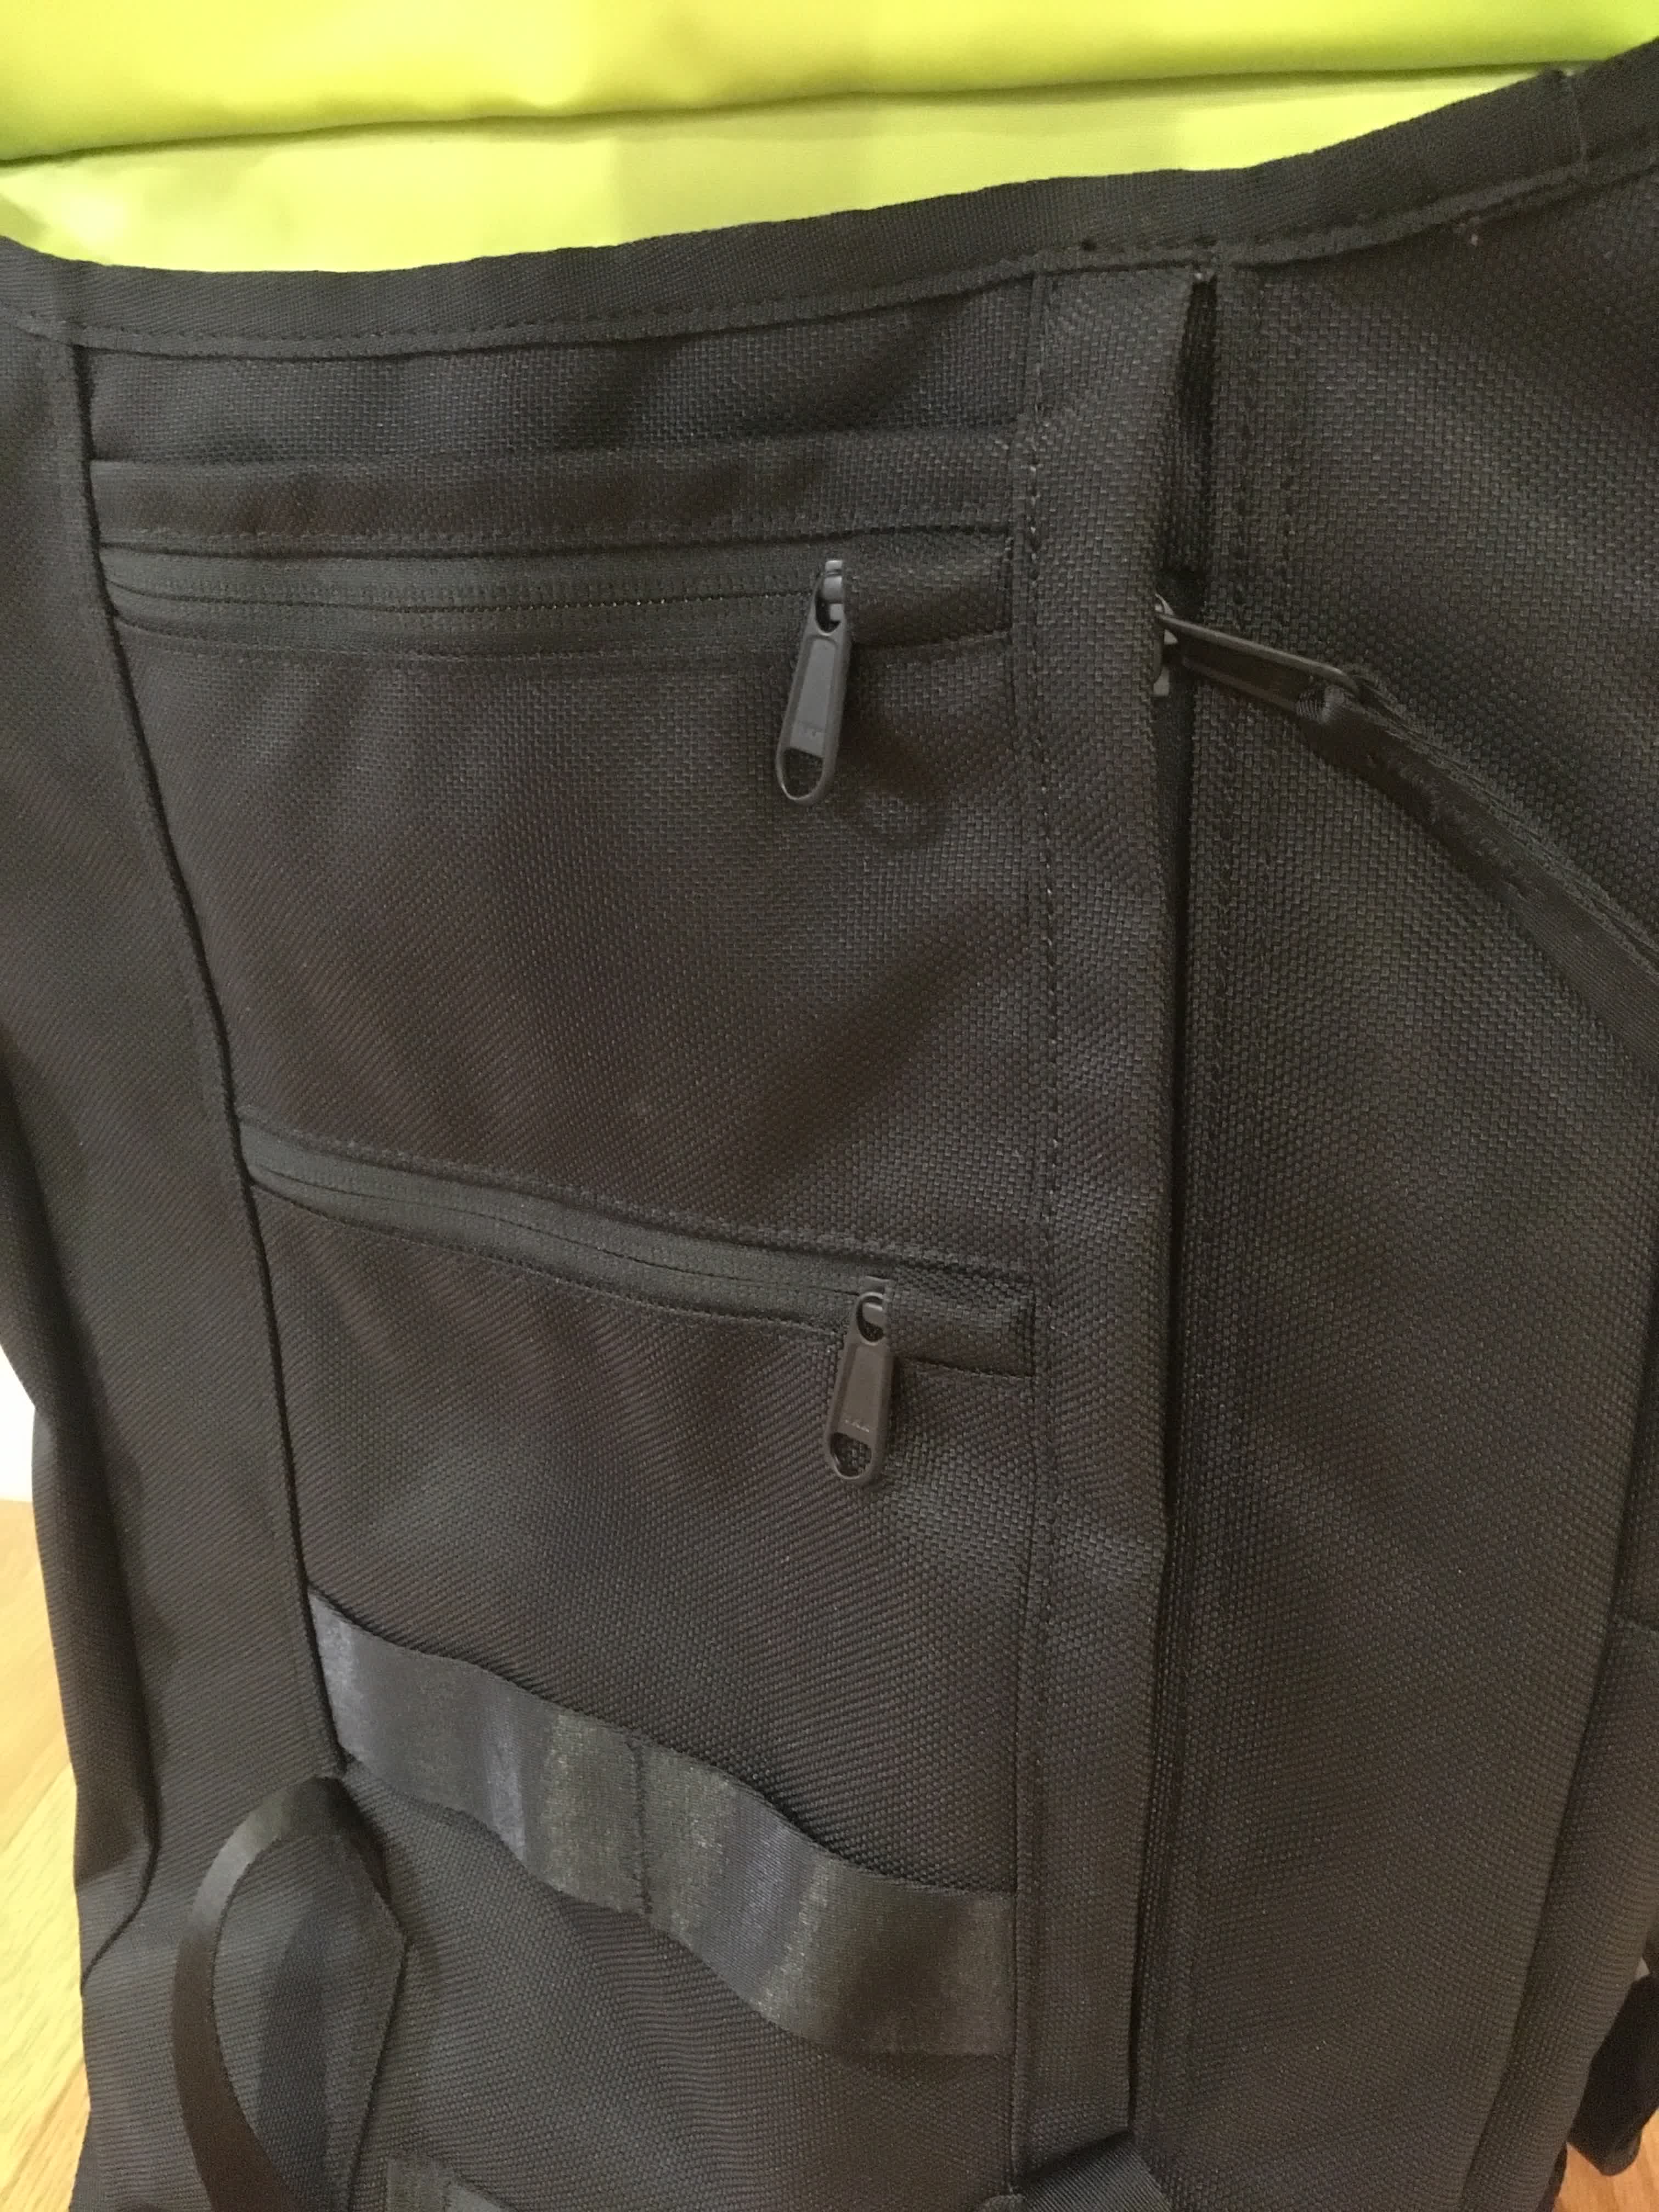 Several pockets line the front of the bag